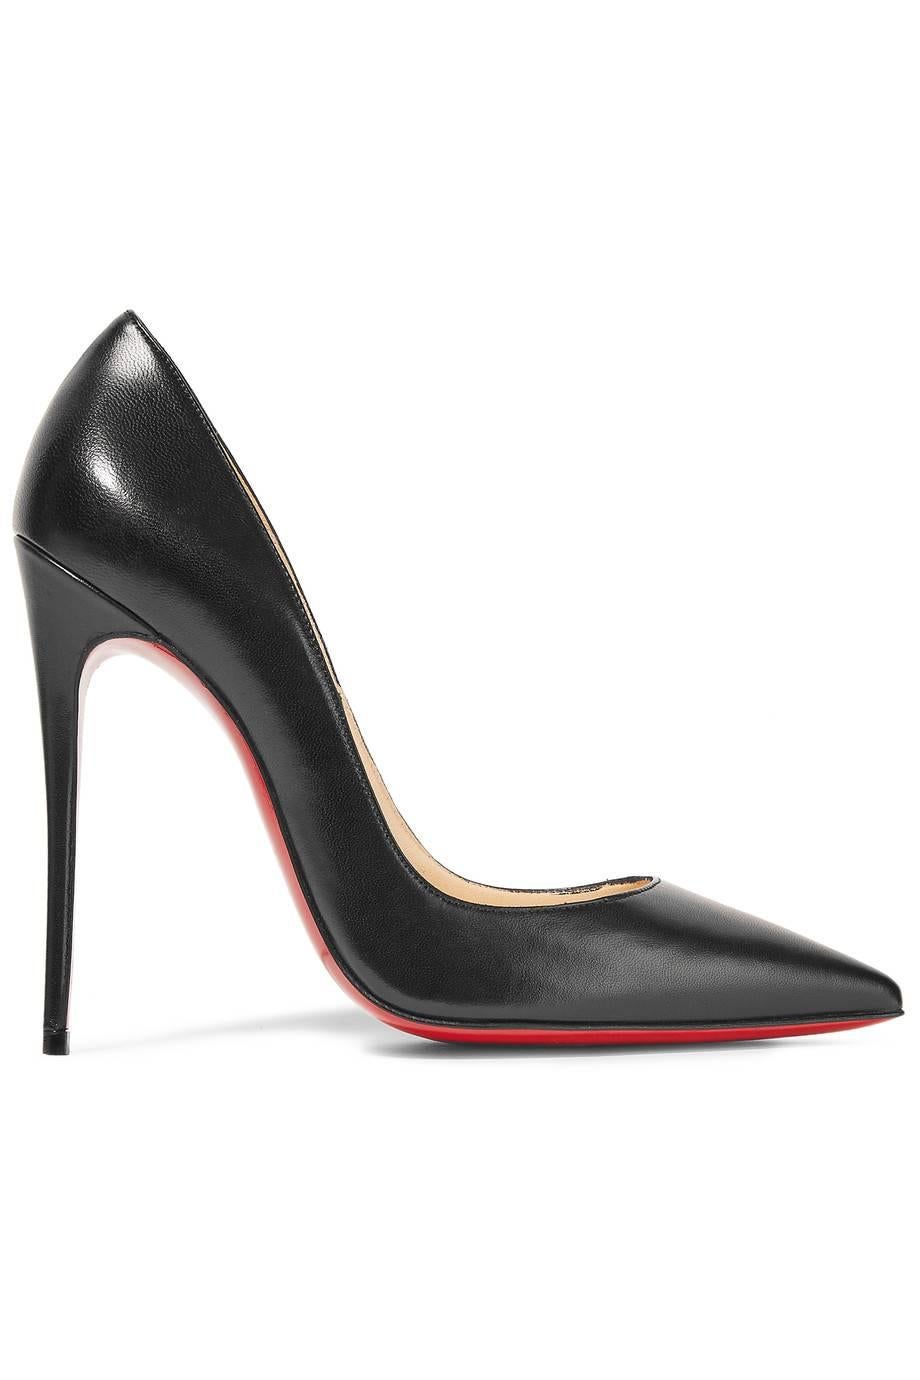 Women's Christian Louboutin New Black Leather SO Kate High Heels Pumps in Box